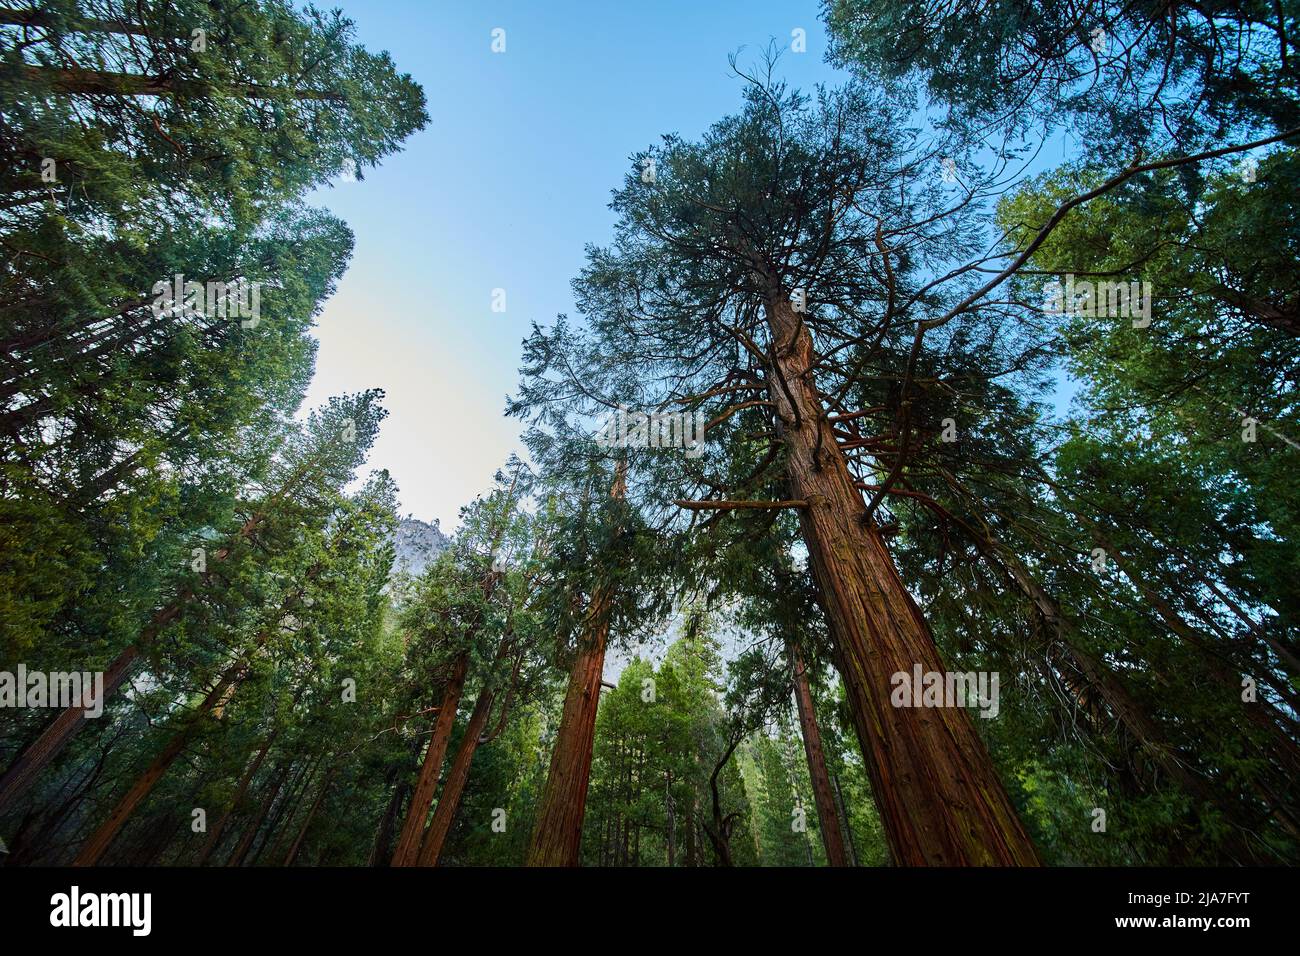 Beautiful vibrant spring forest looking up at large pine trees Stock Photo